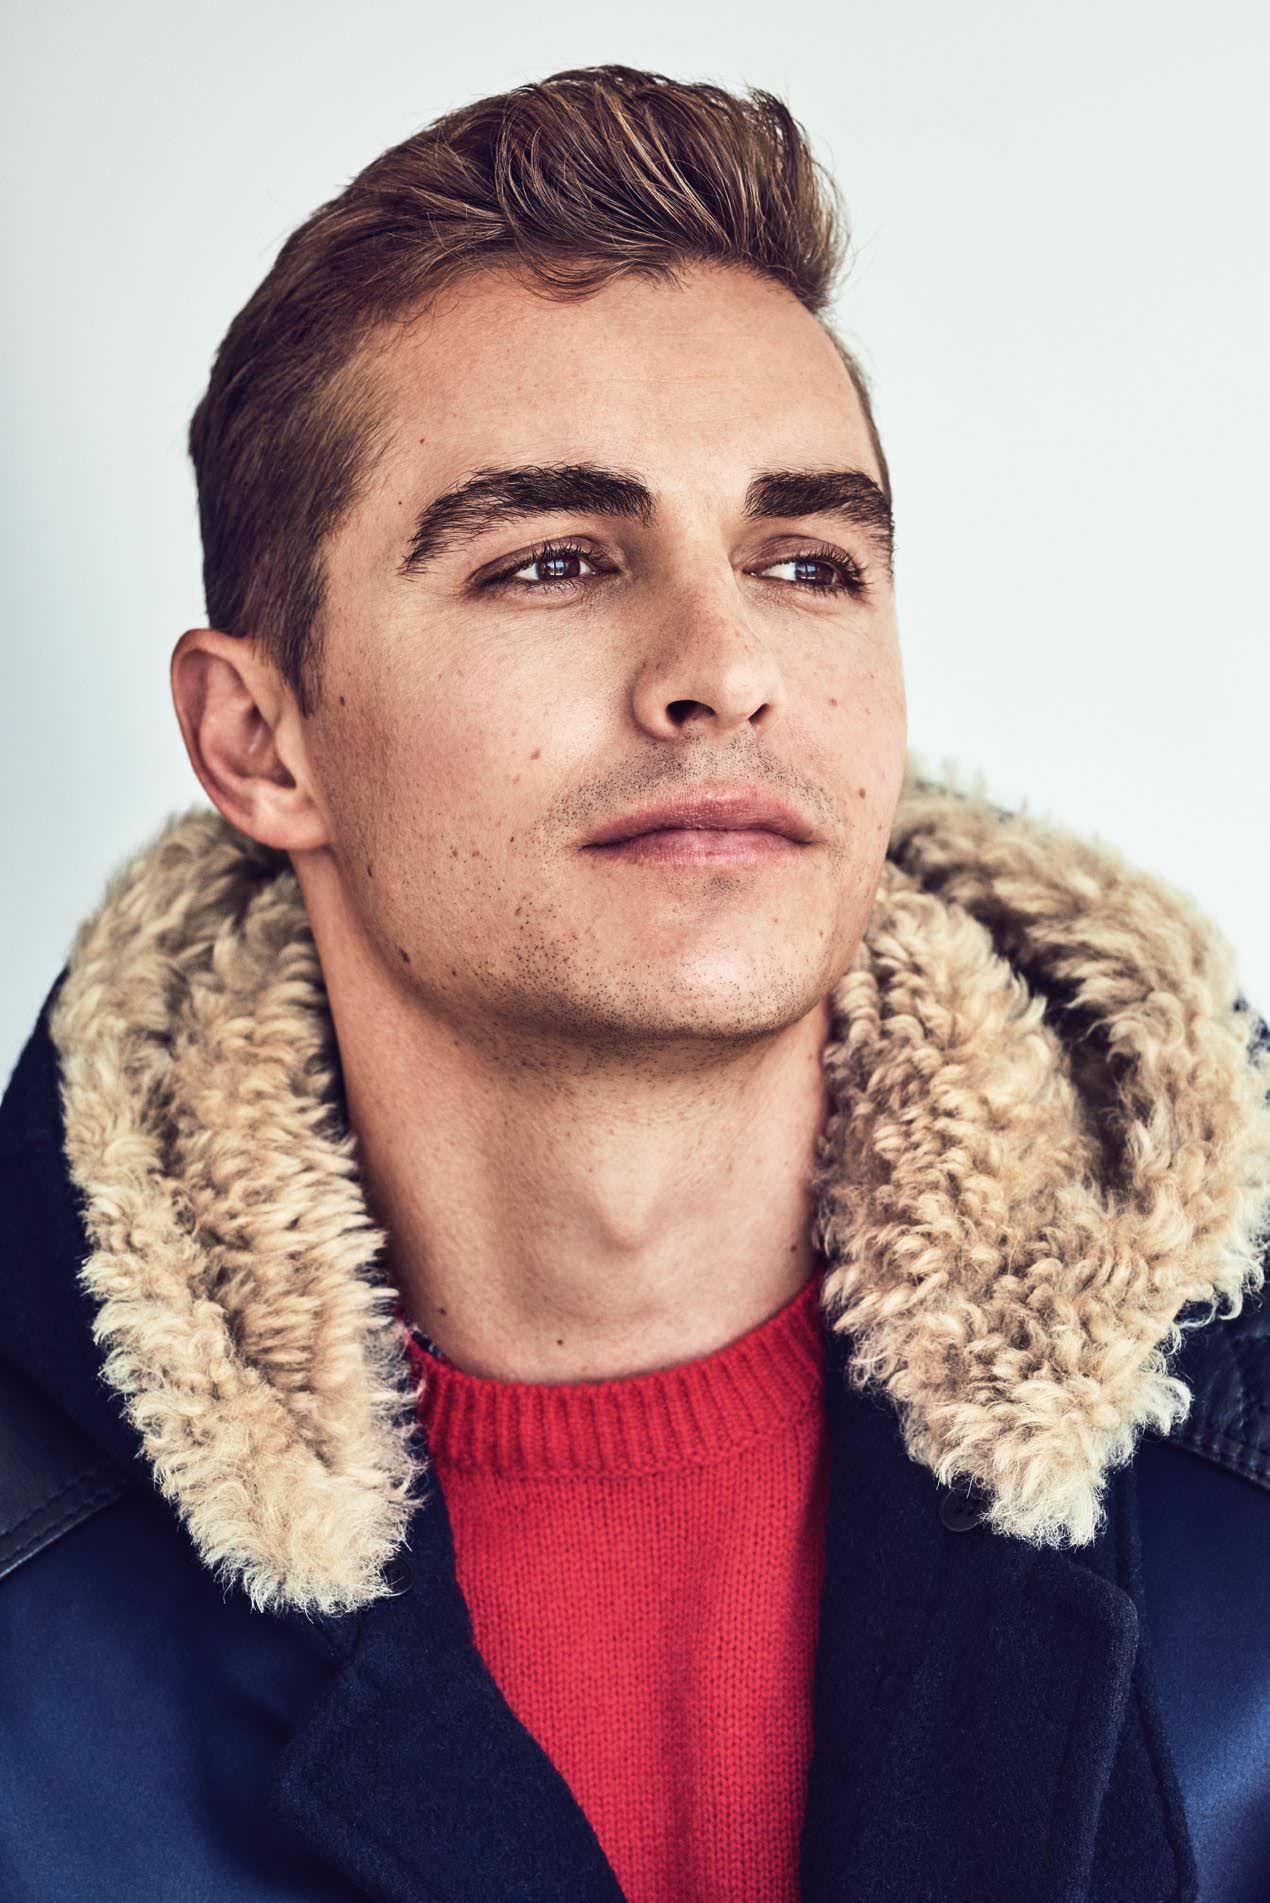 will-the-real-dave-franco-please-stand-up.jpg